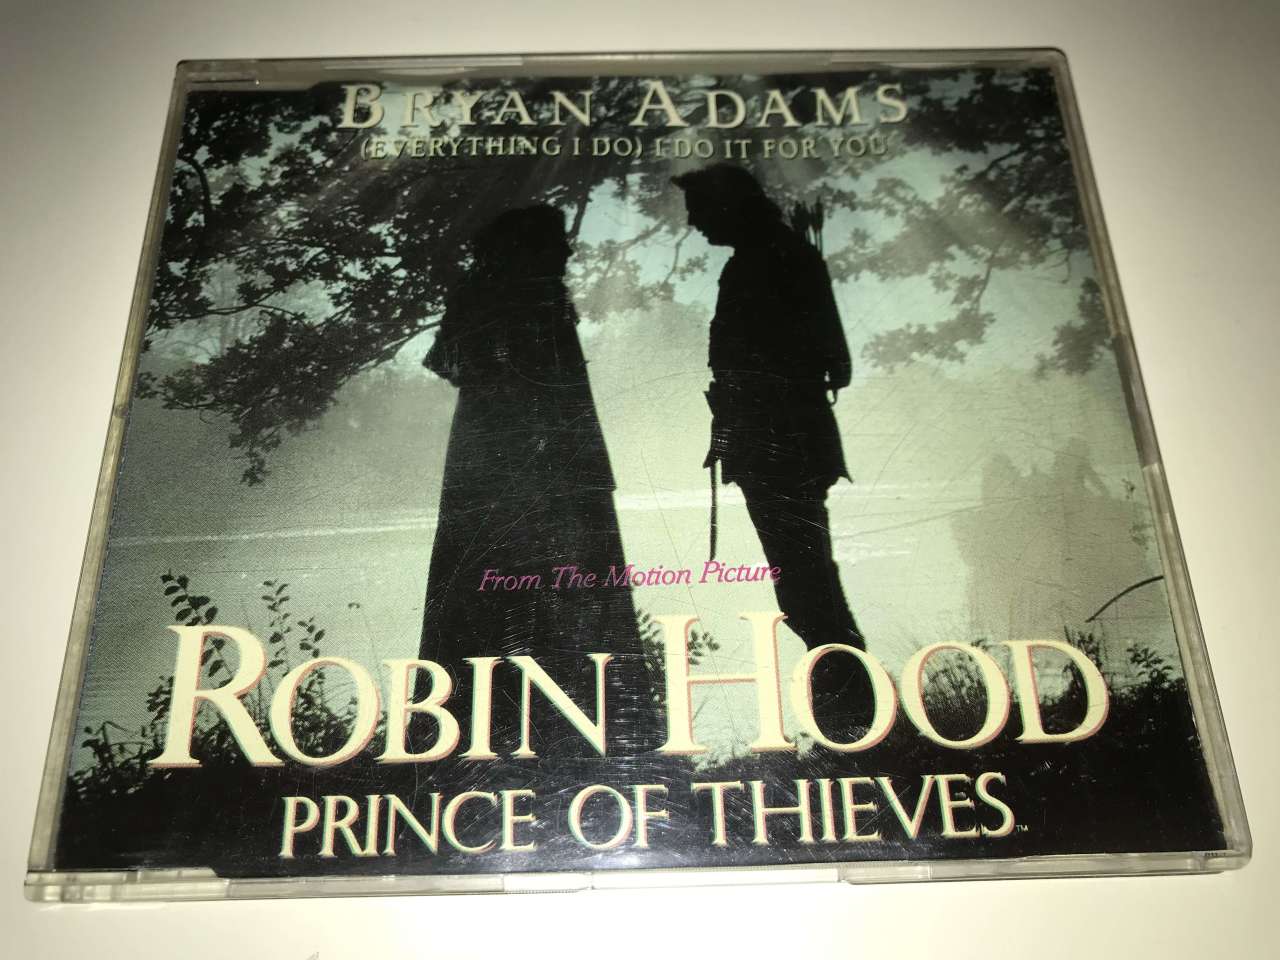 Bryan Adams – Robin Hood  (Everything I Do) I Do It For You